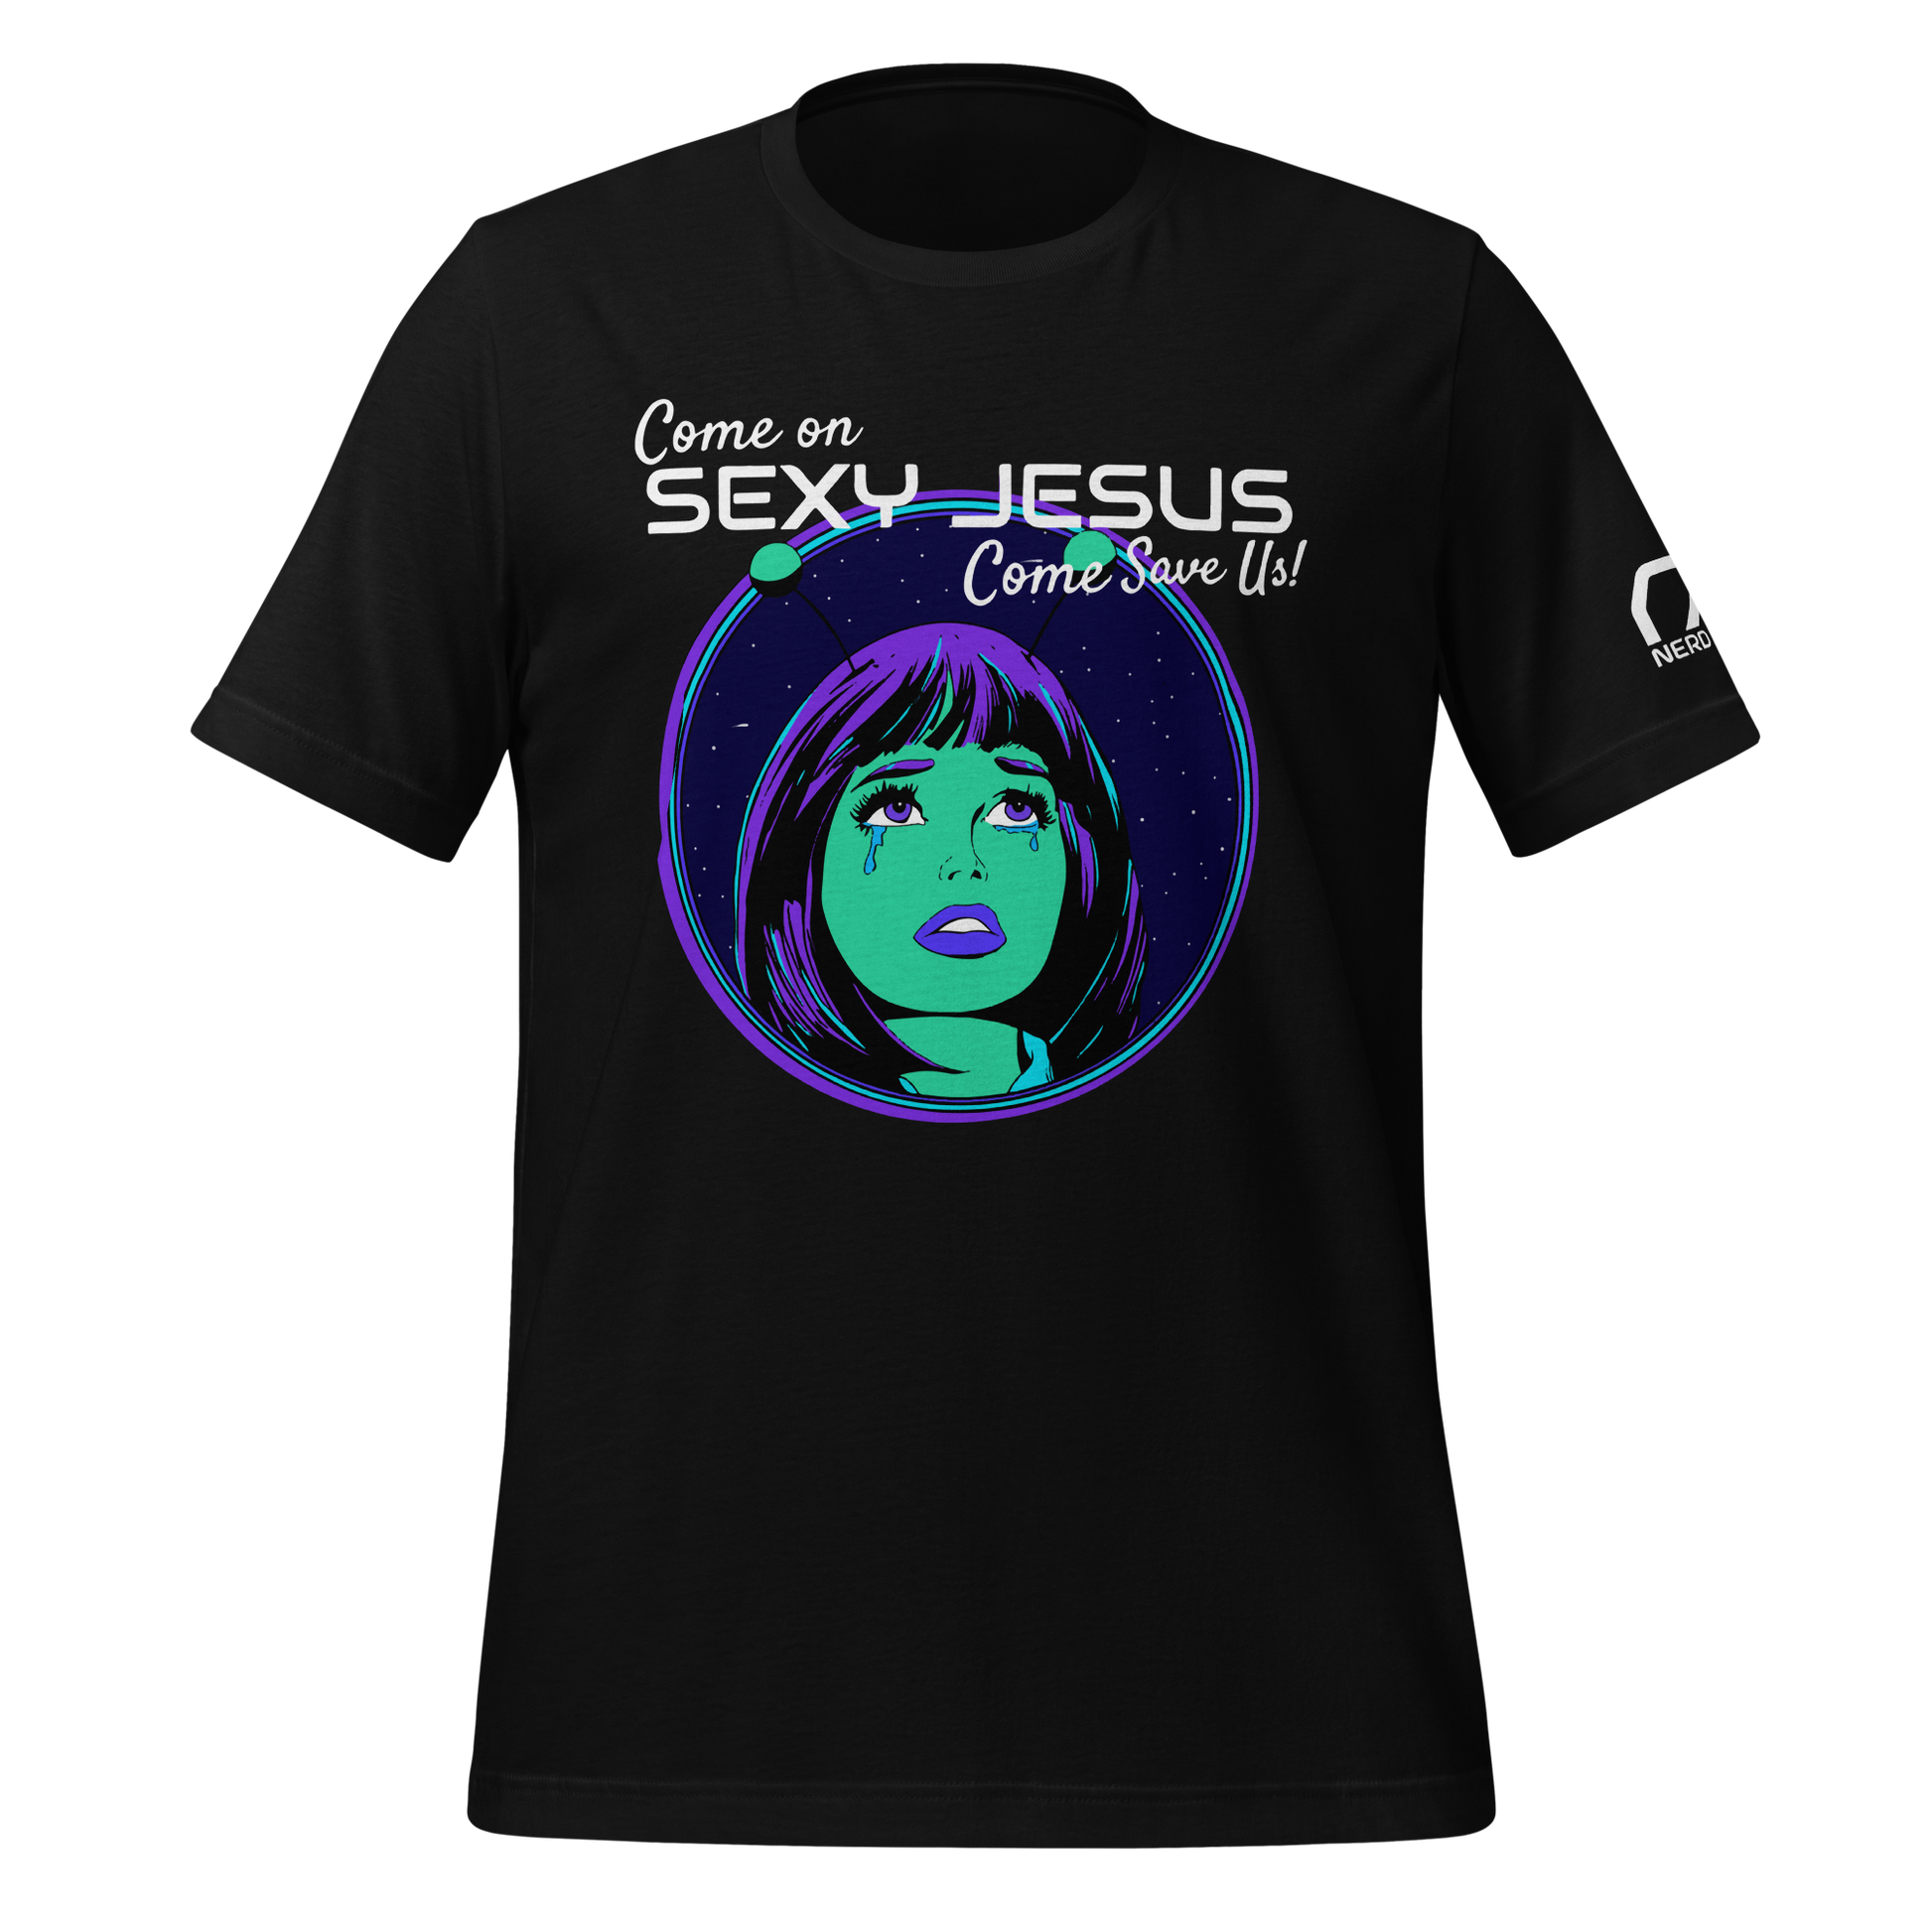 Nerd Alert's "Come on Sexy Jesus" T-shirt design with a purple and green alien woman crying as the focus.